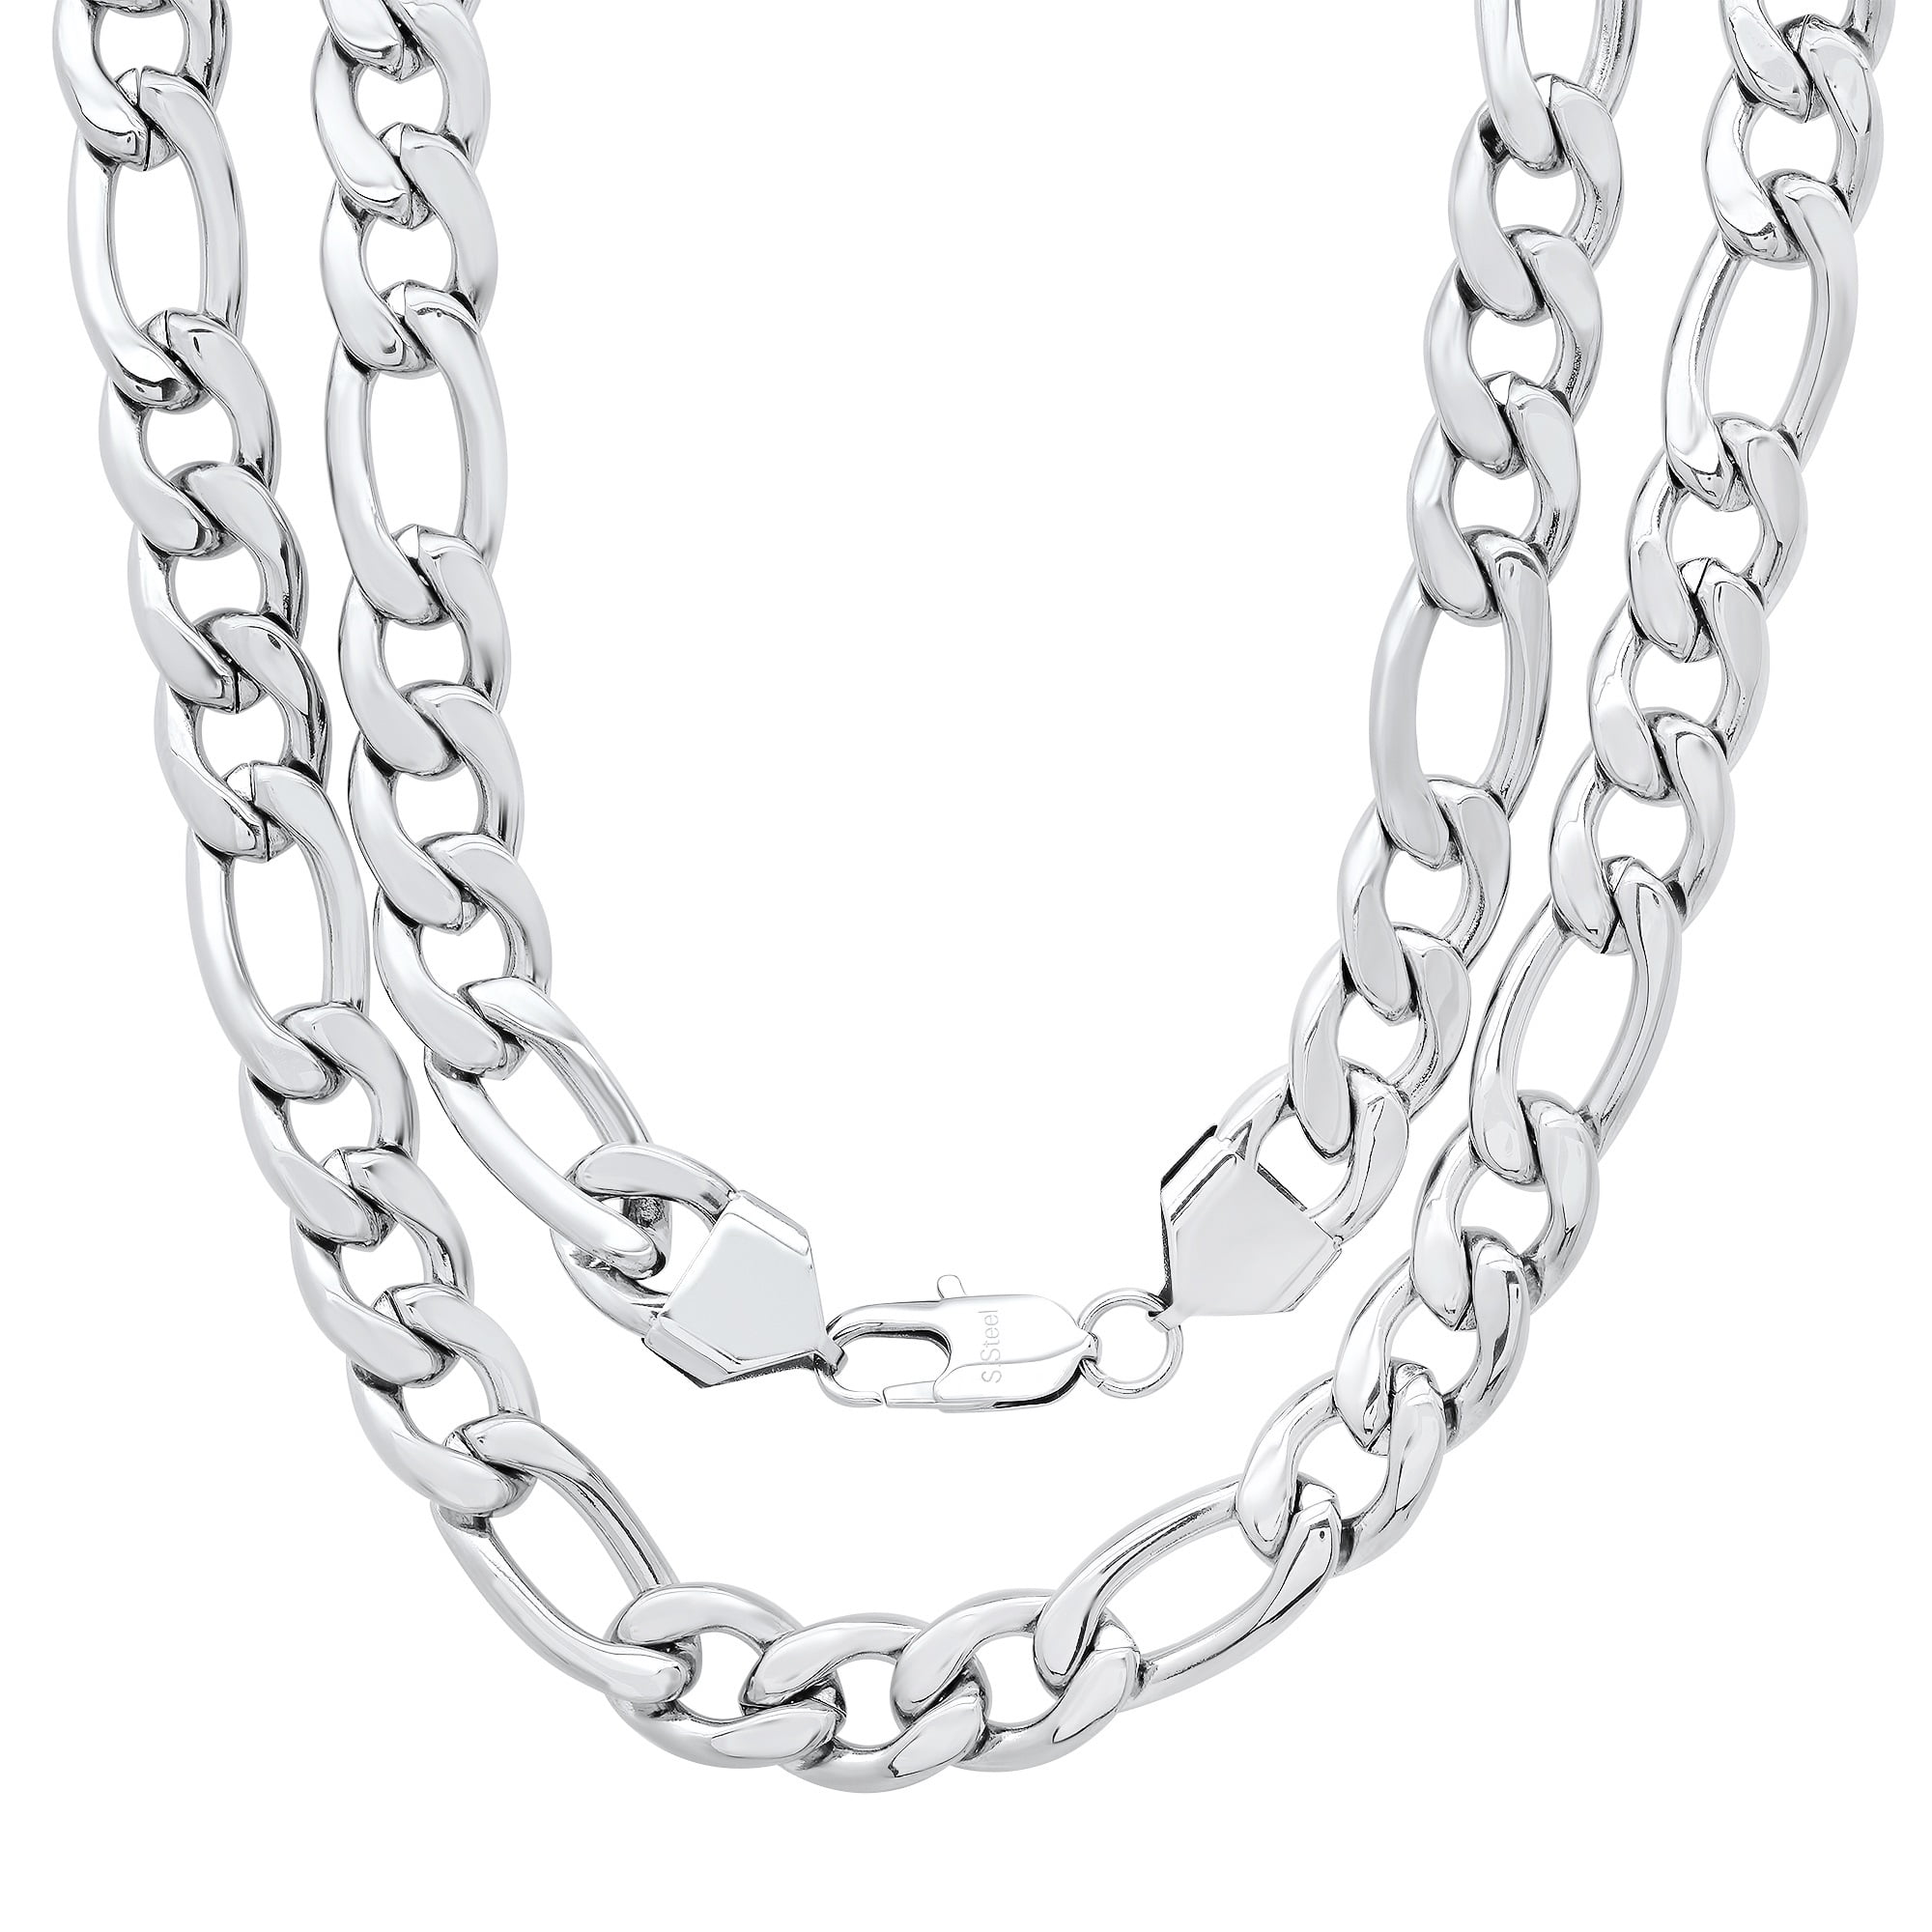 The Bling Factory - Men's 11.2mm High-Polished Stainless Steel Flat Mens Figaro Chain Stainless Steel